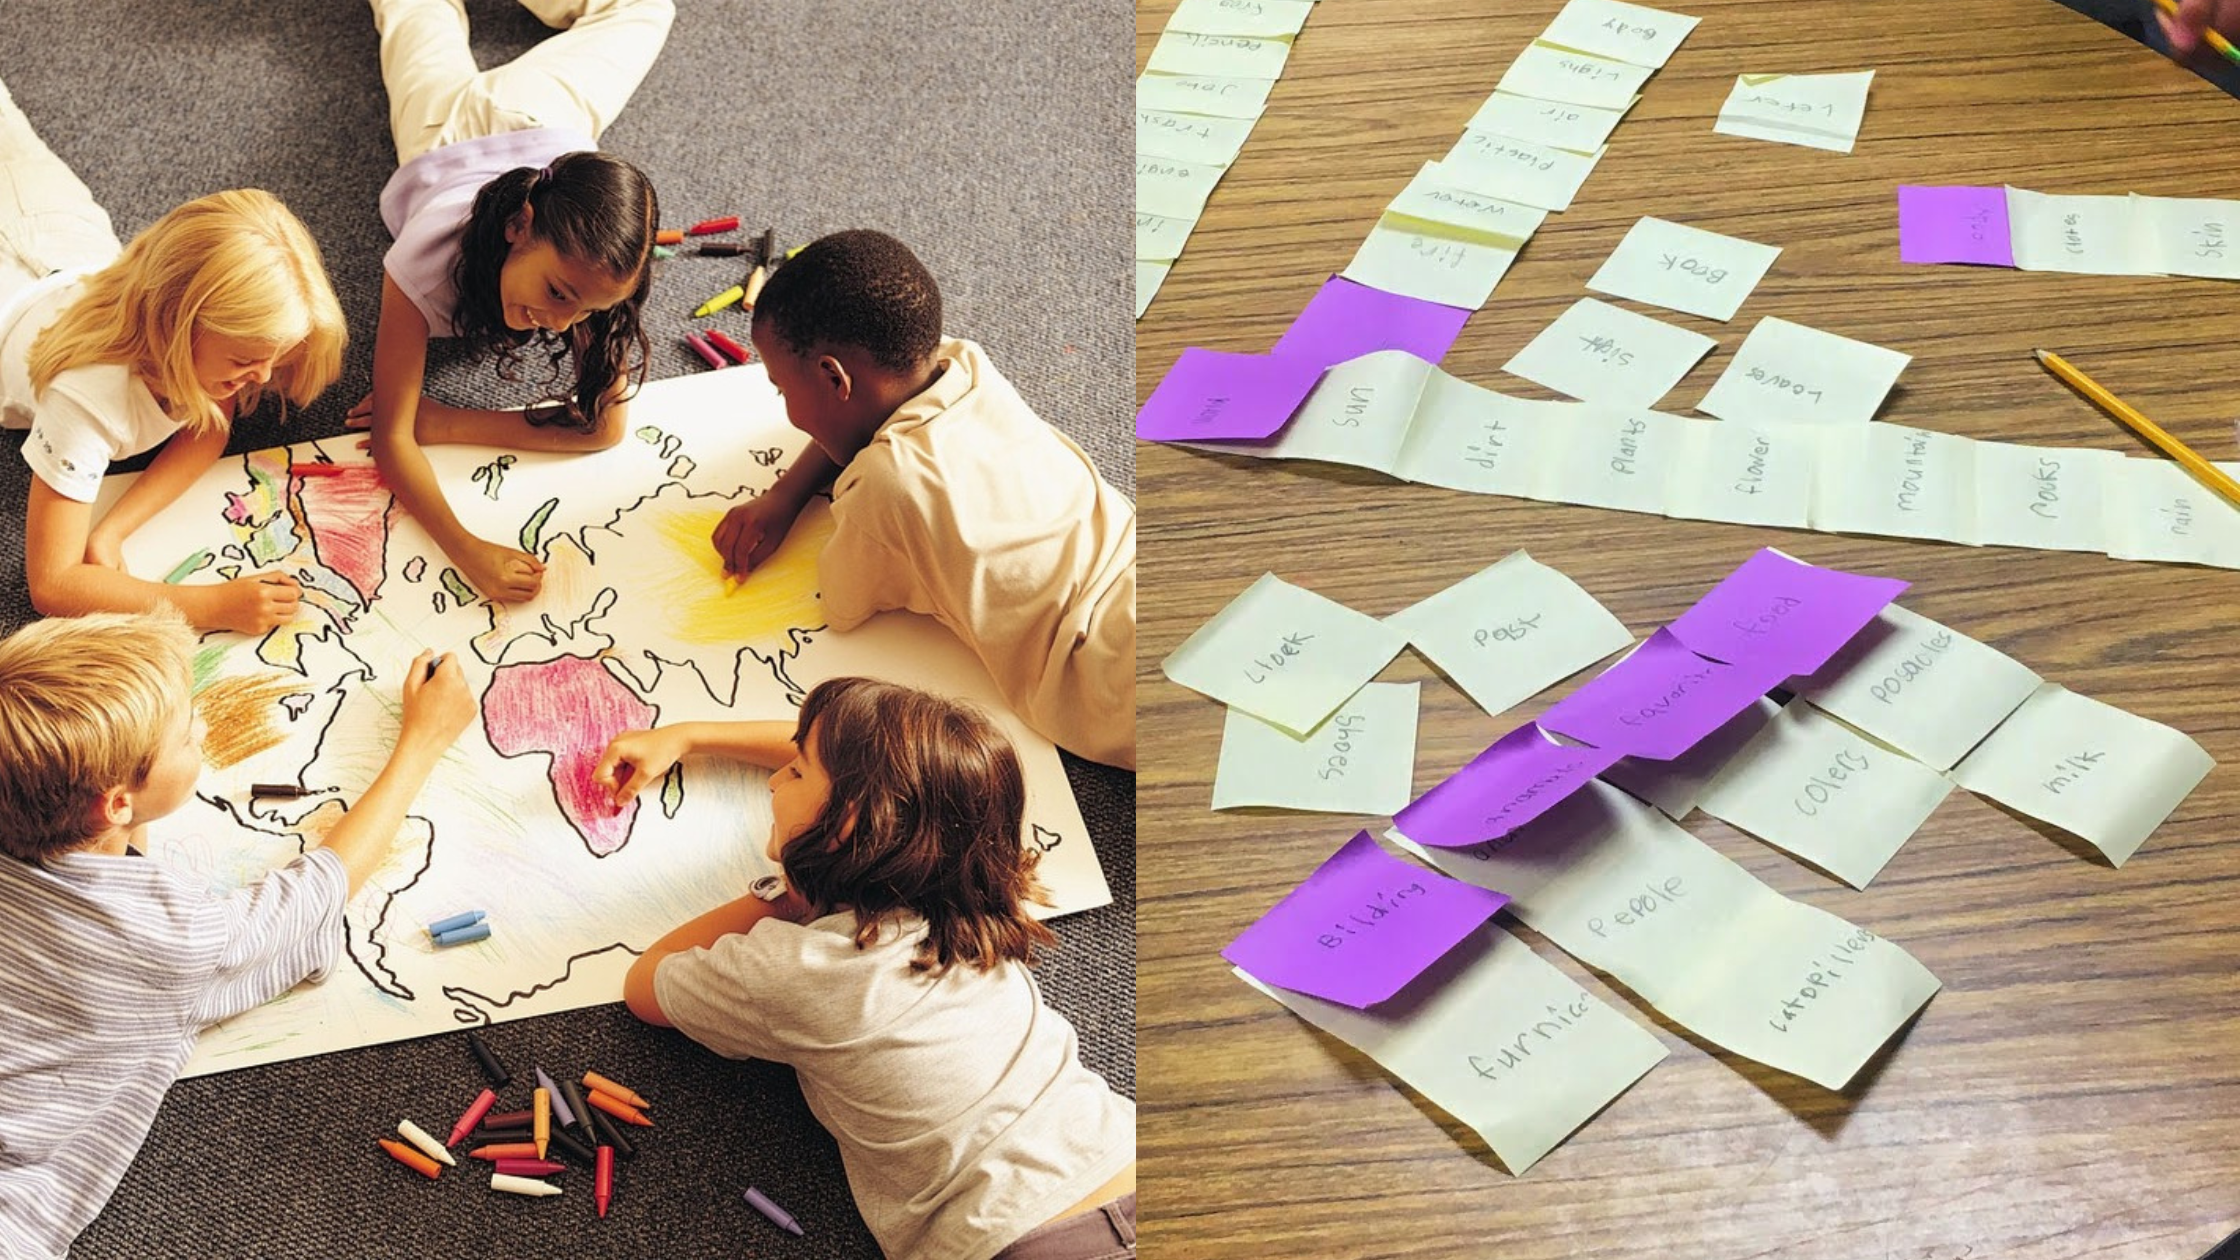 Collaborative Learning Activities for Elementary Students